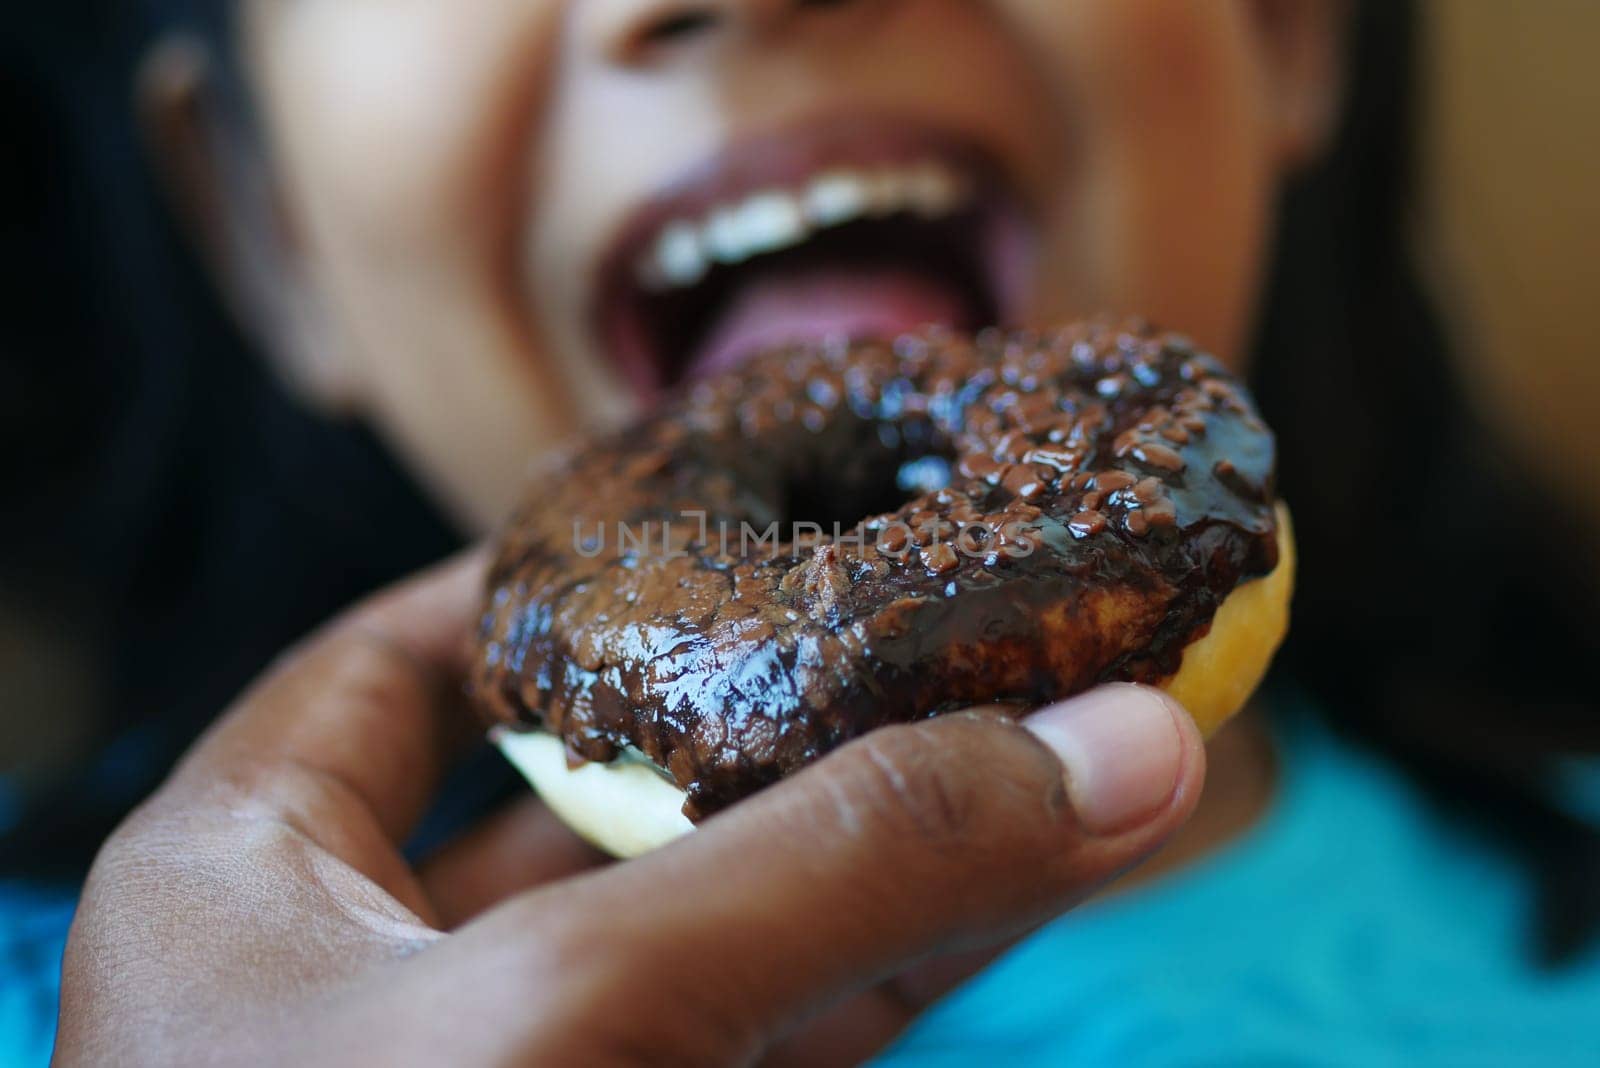 child mouth eating chocolate donuts by towfiq007